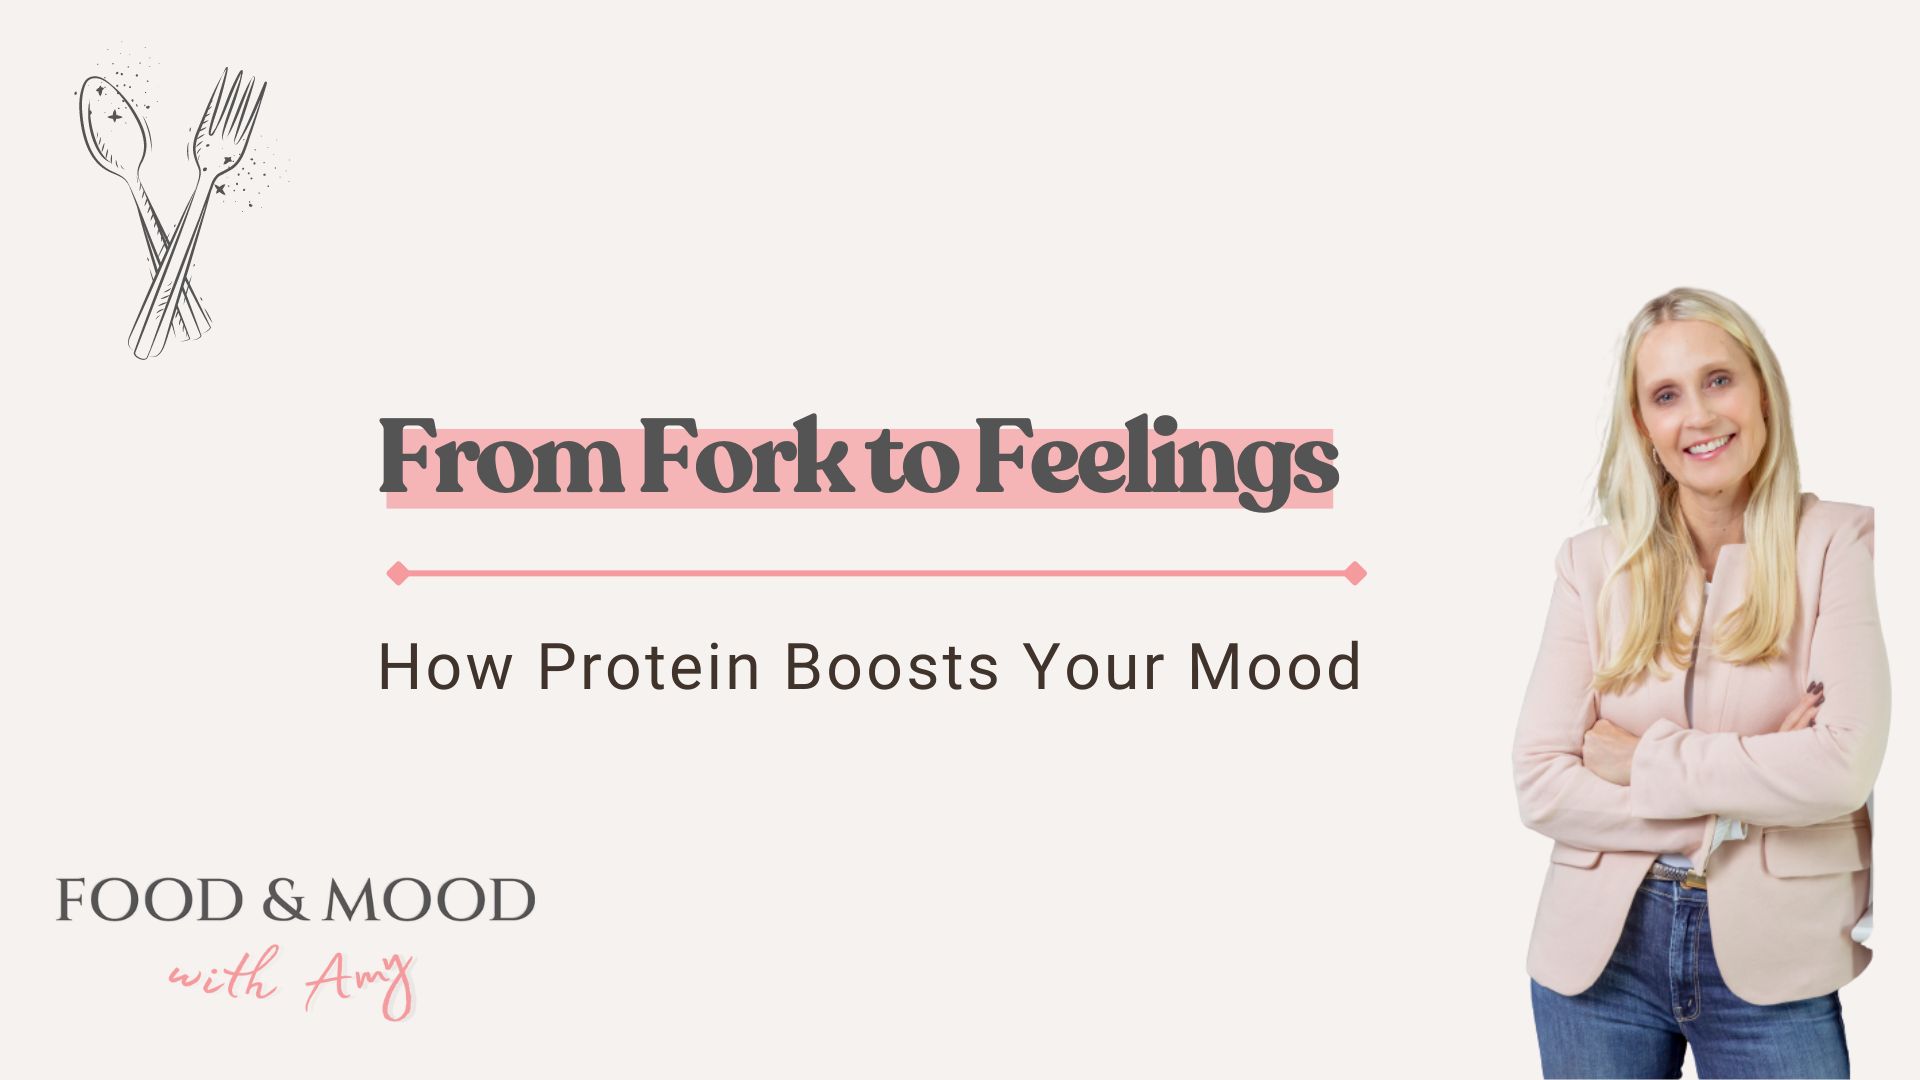 How Protein Boosts Your Mood